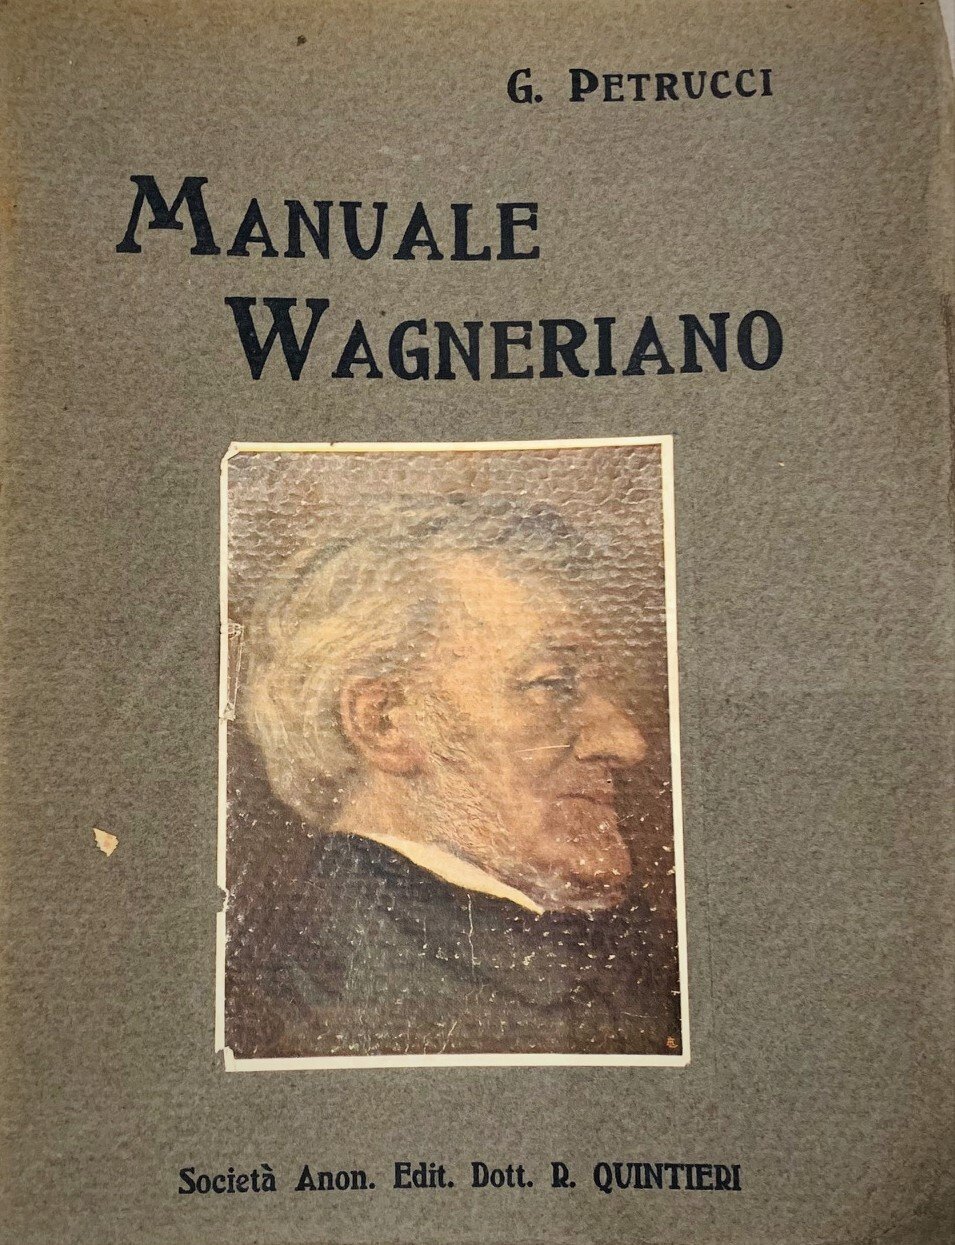 &lt;p&gt;&lt;strong&gt;Manuale Wagneriano.&lt;/strong&gt;&lt;/p&gt;